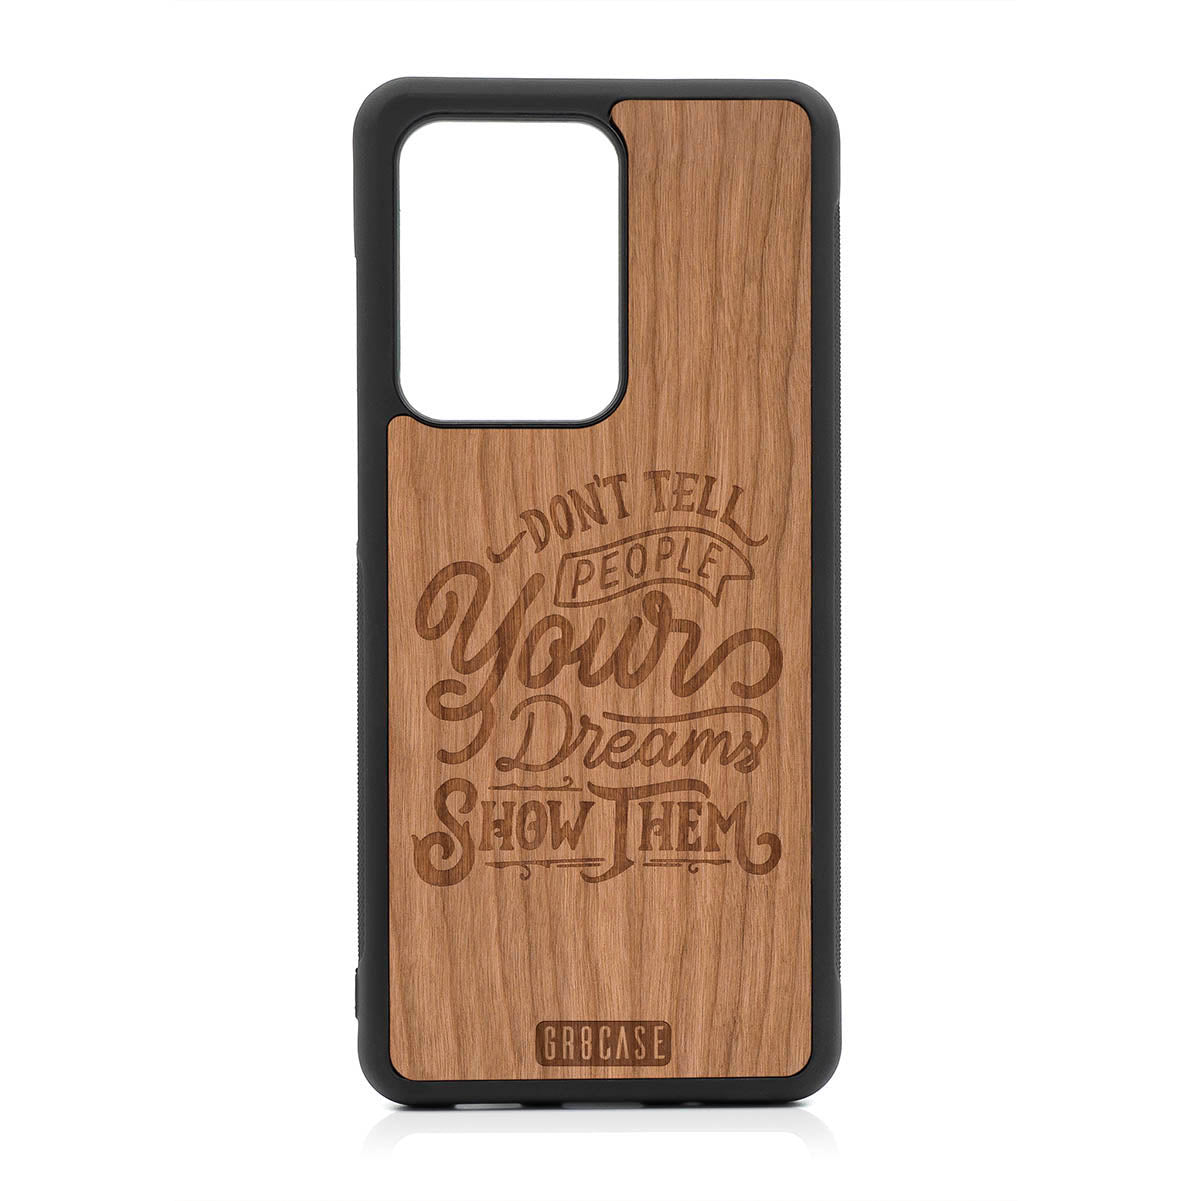 Don't Tell People Your Dreams Show Them Design Wood Case For Samsung Galaxy S20 Ultra by GR8CASE